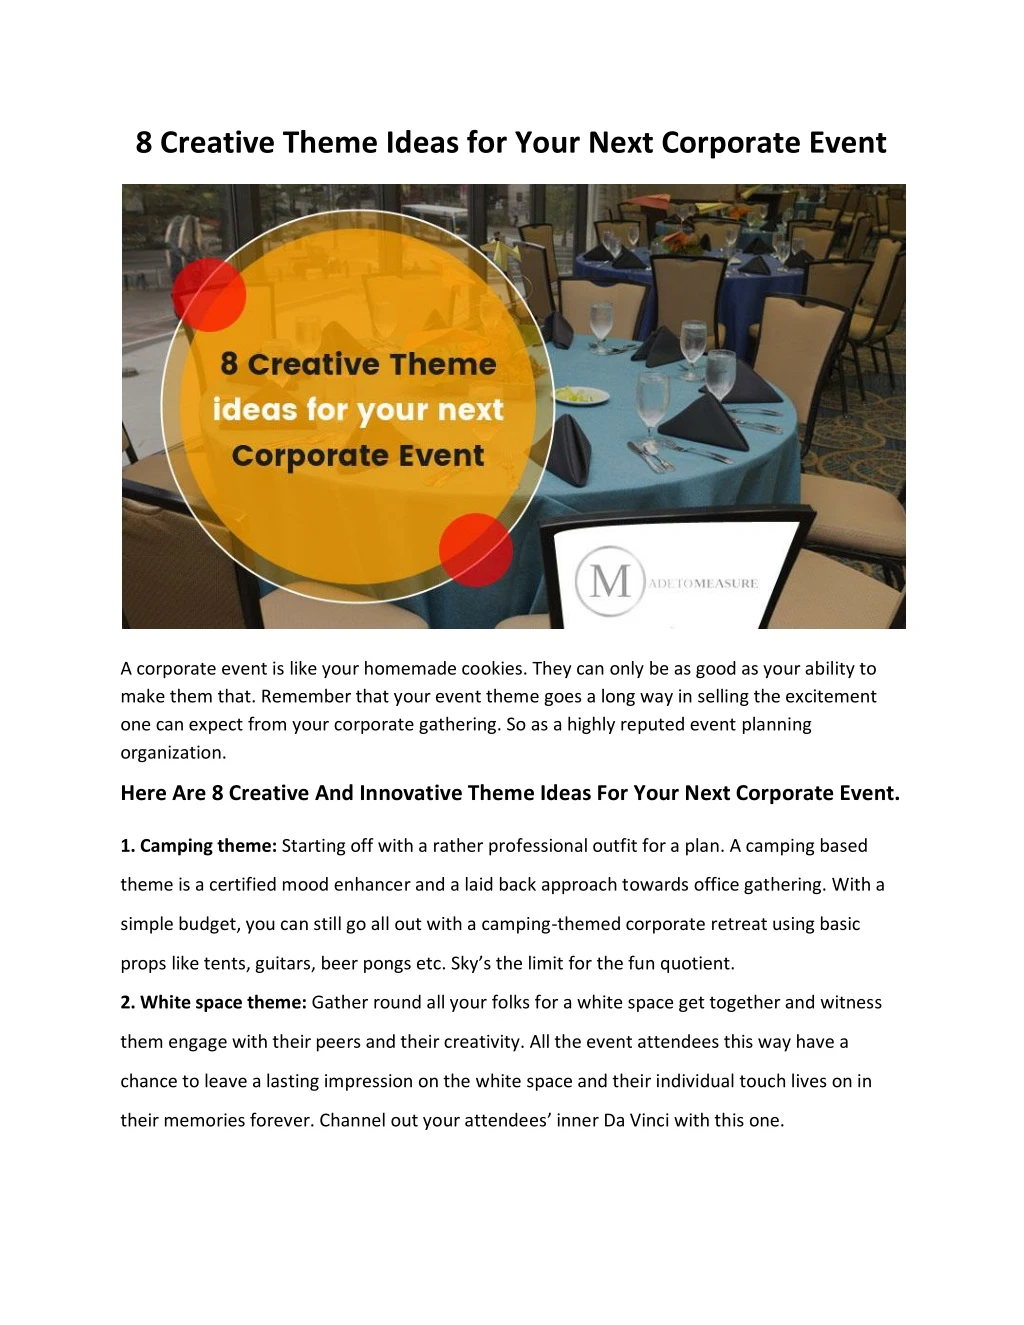 8 creative theme ideas for your next corporate